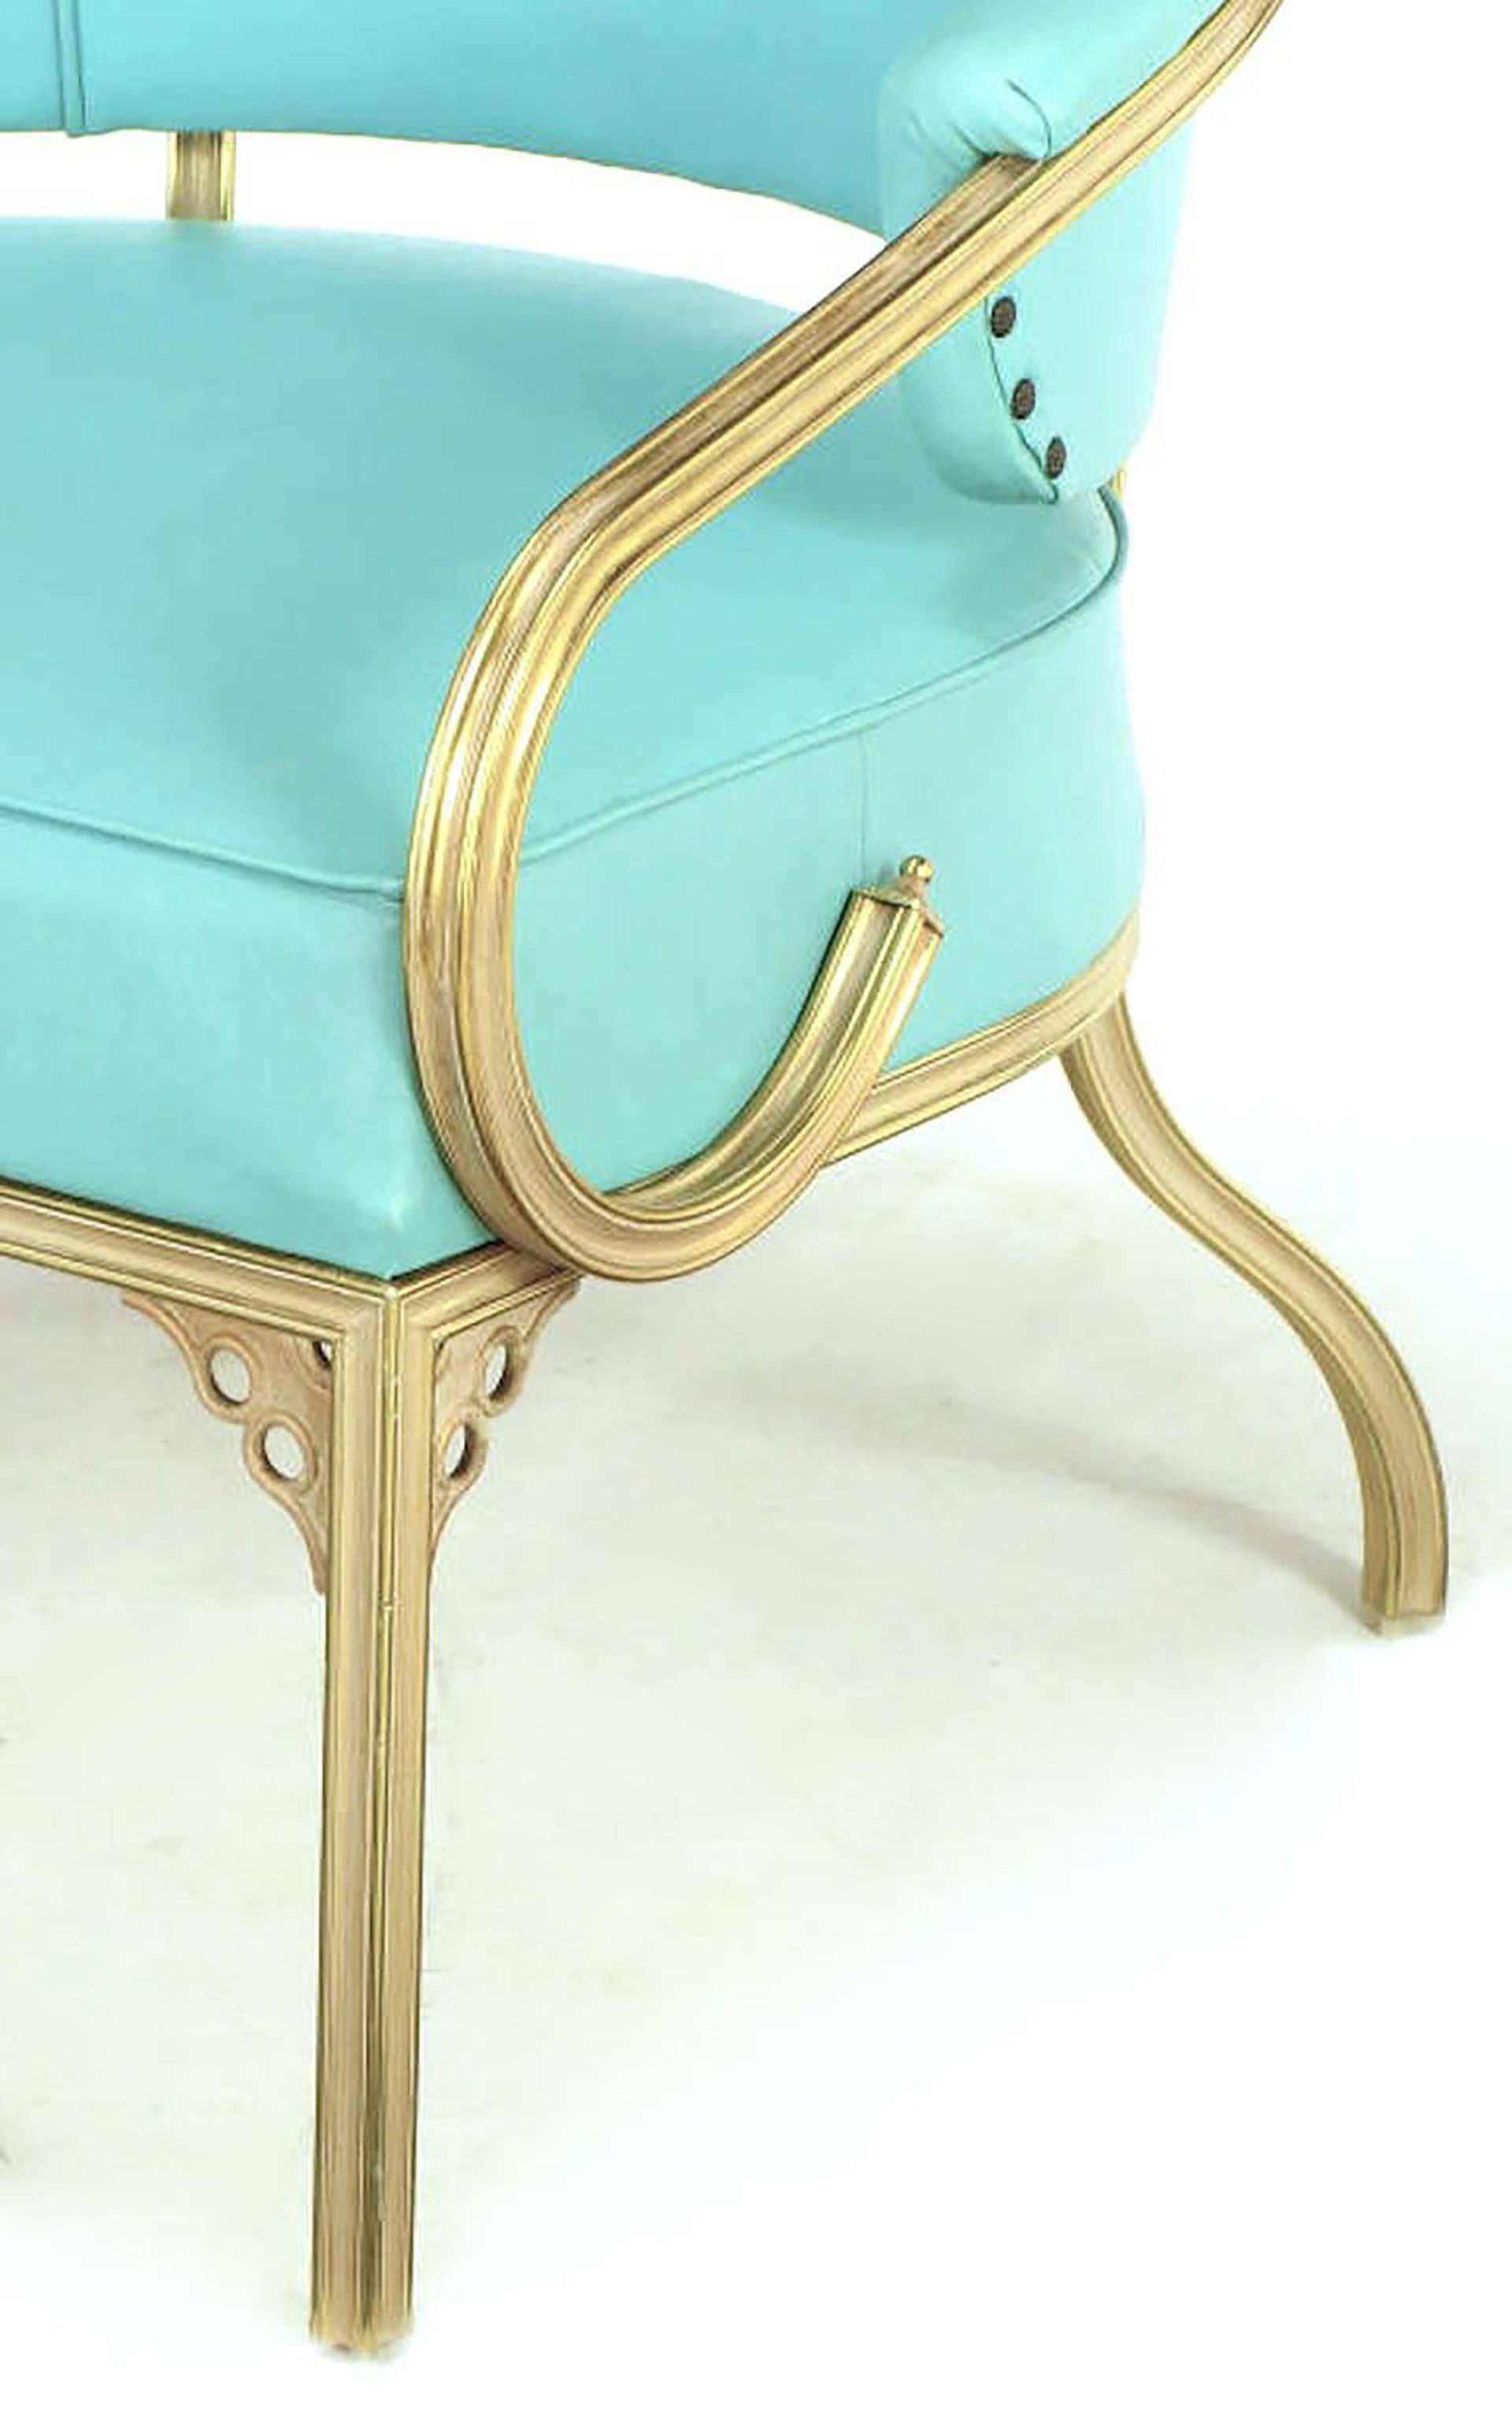 American Four John Van Koert Cymbal Collection Gold and Tiffany Blue Lounge Chairs